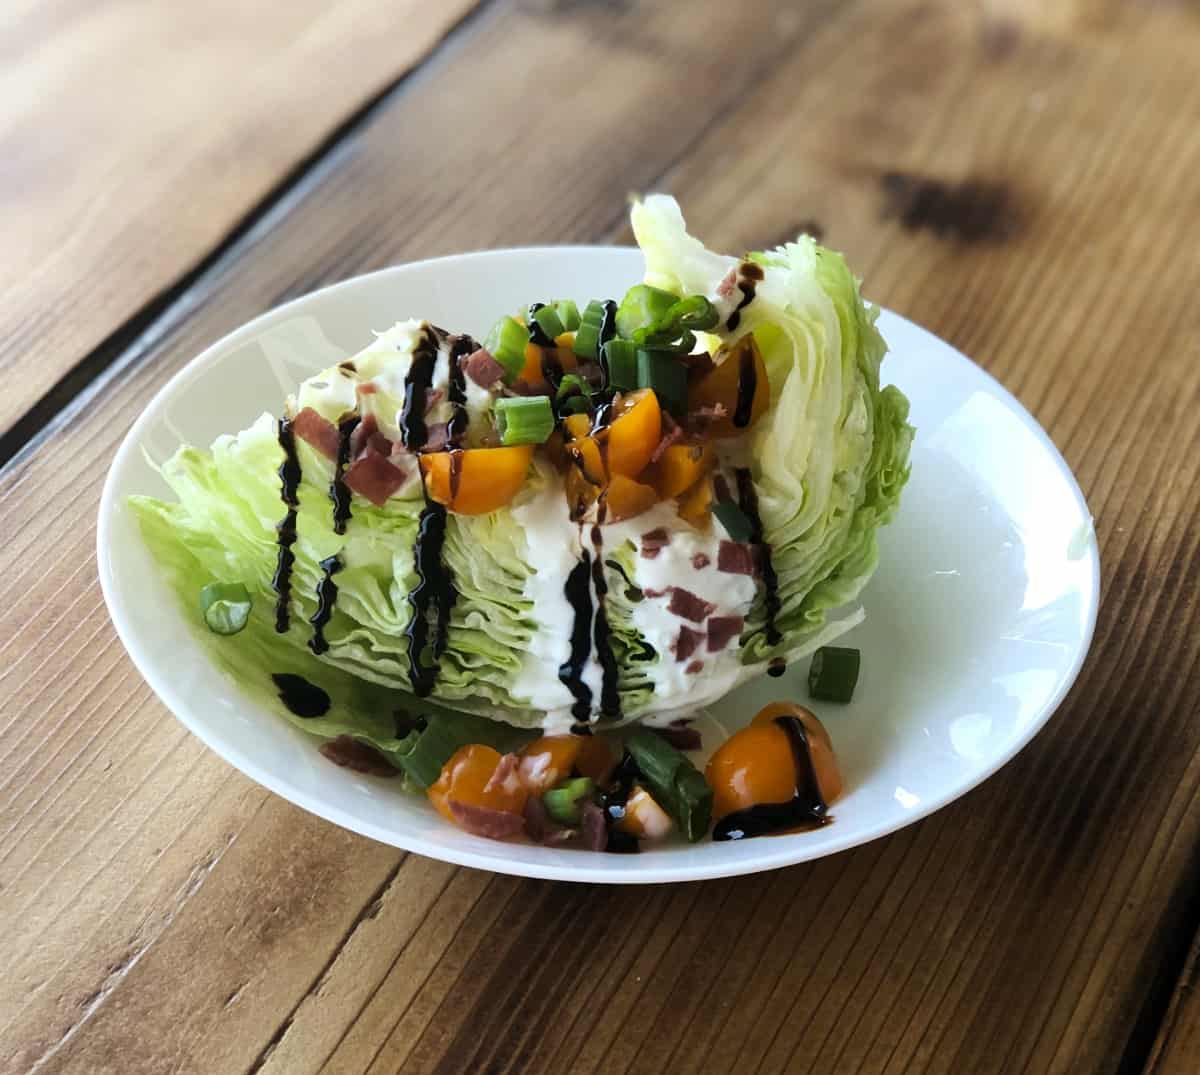 Iceberg lettuce wedge salad topped with creamy blue cheese, tomatoes, green onions, bacon bits and balsamic glaze